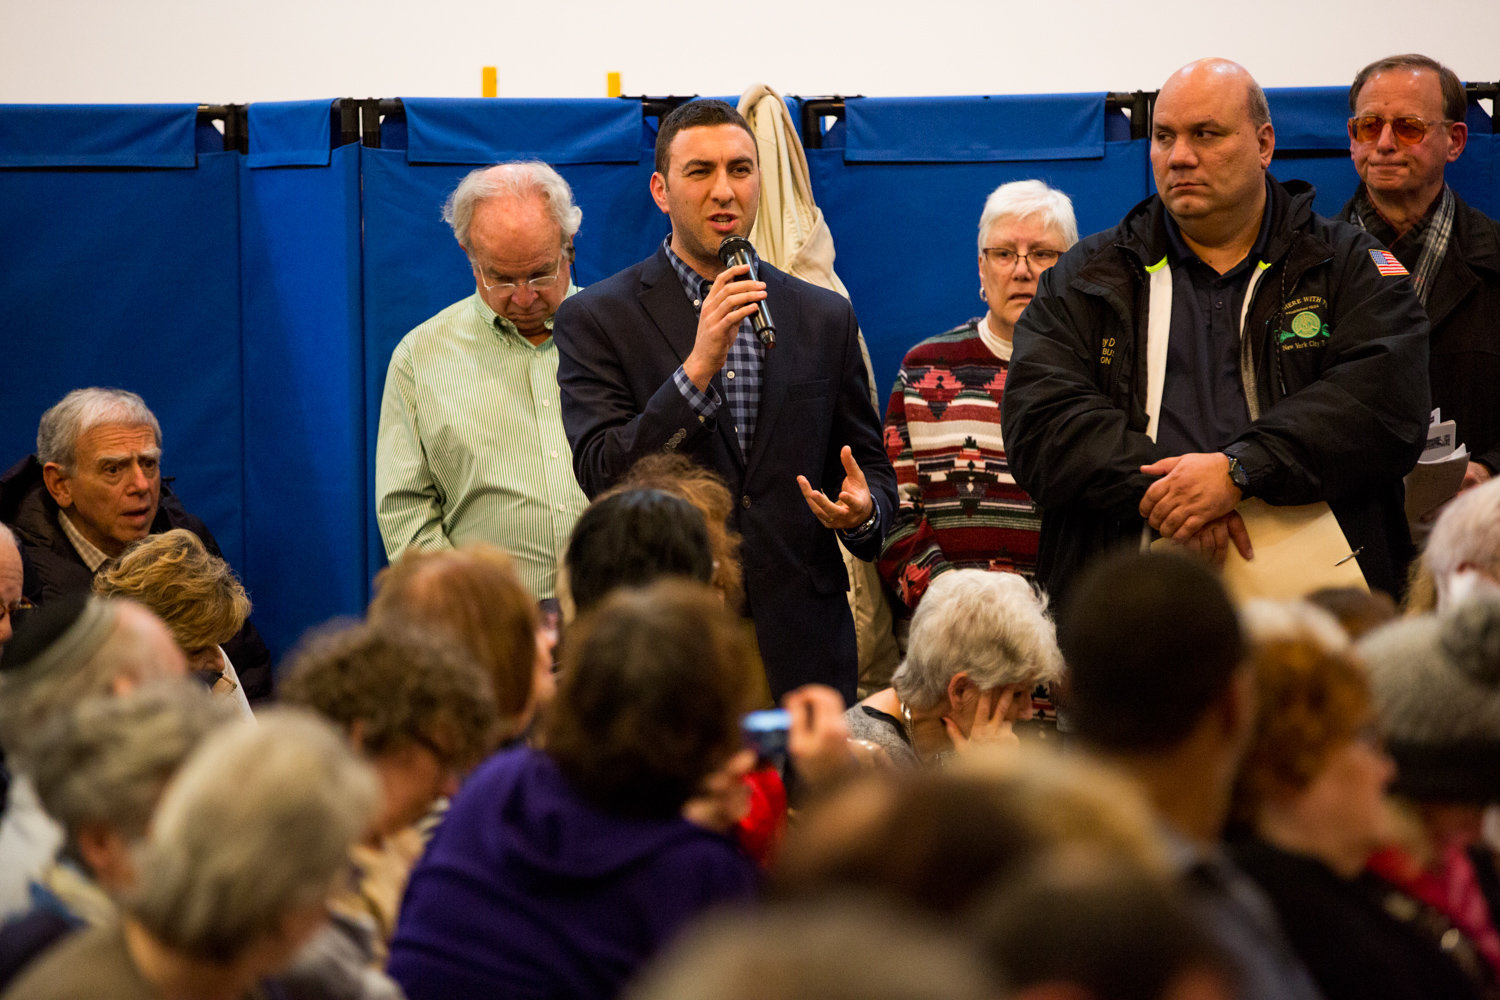 City council candidate Eric Dinowitz alleges the proposed cuts to express bus service are a form of age discrimination during a Nov. 18 community meeting with Metropolitan Transportation Authority officials organized by his father, Assemblyman Jeffrey Dinowitz.